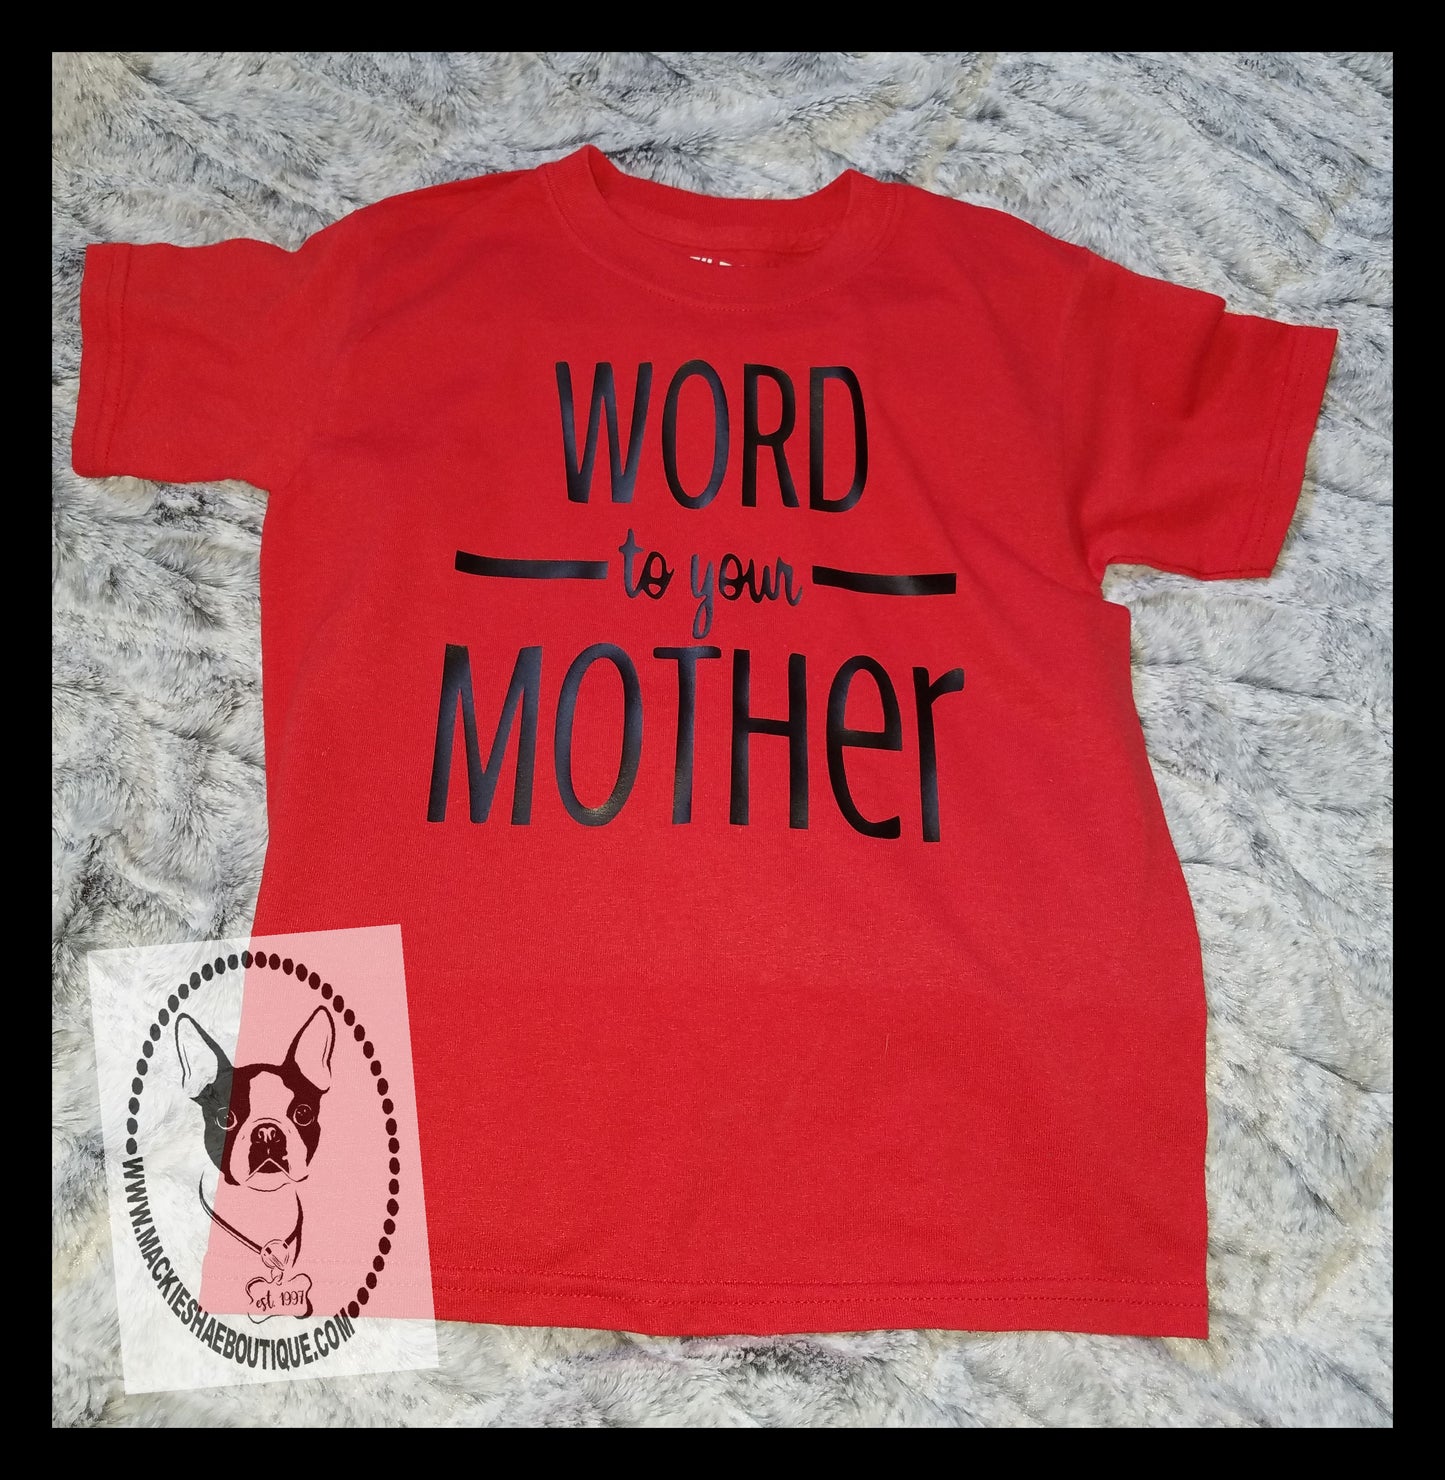 Word to Your Mother Custom Shirt for Kids